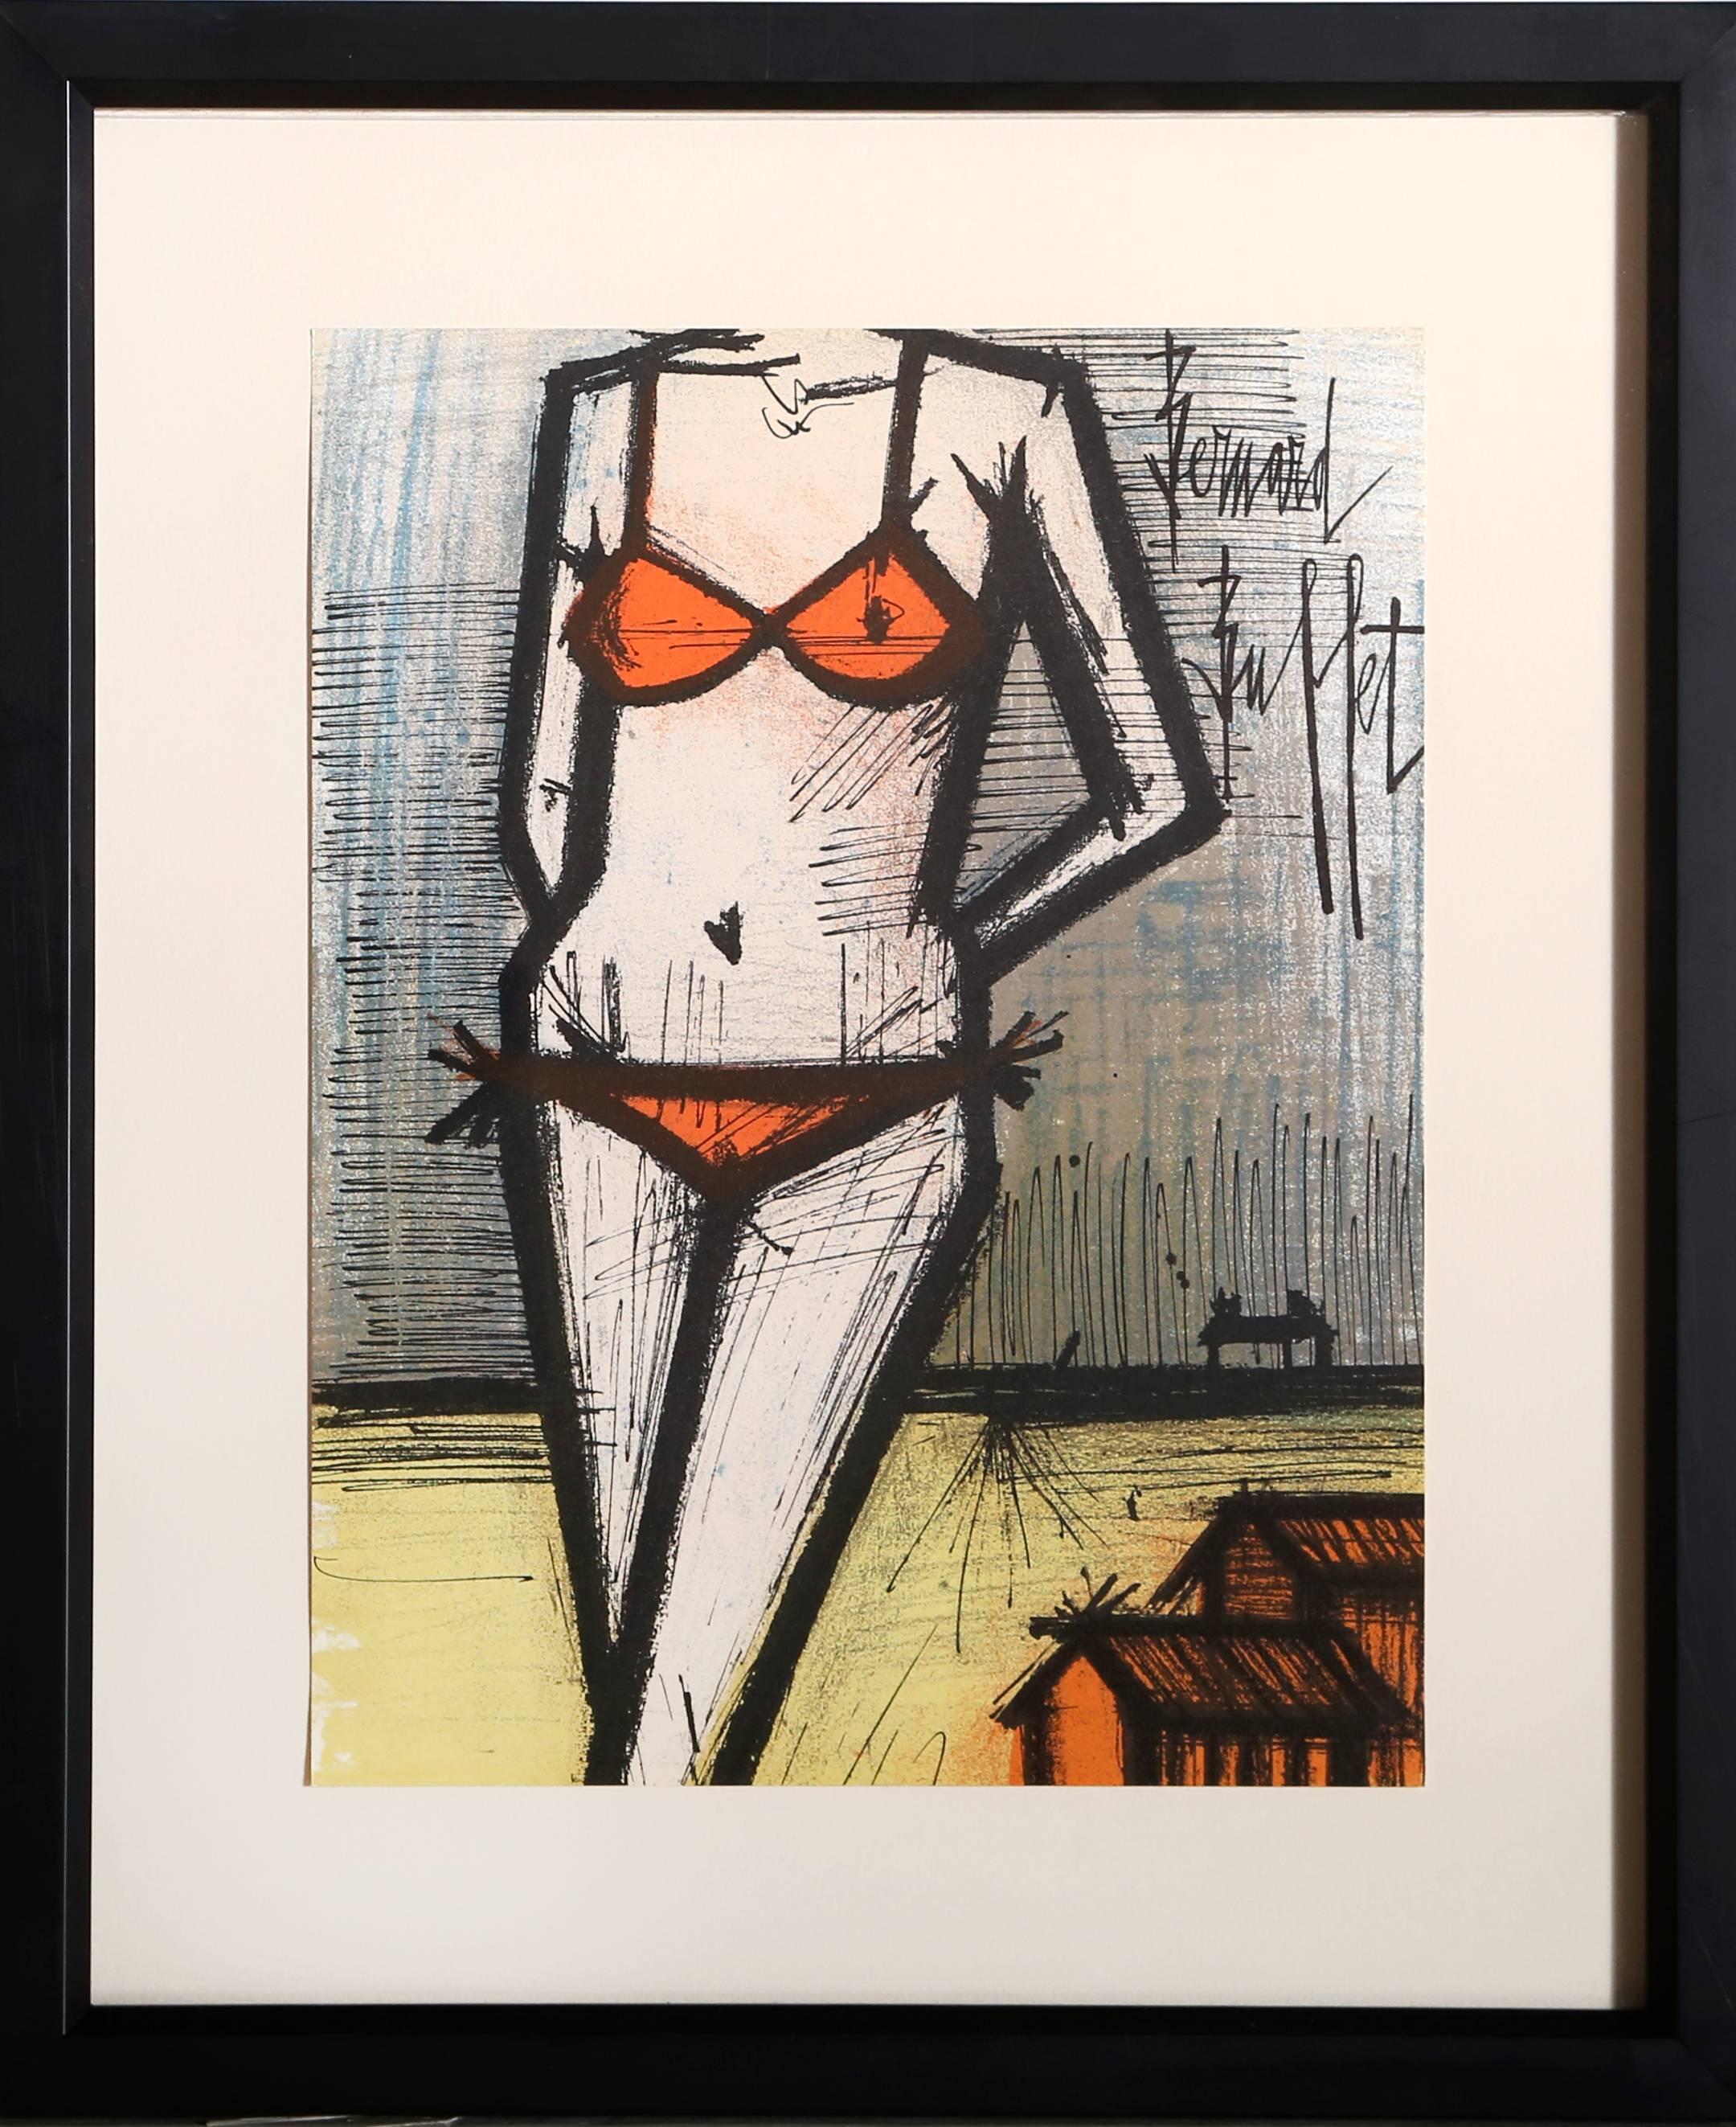 Artist: Bernard Buffet, French (1928 - 1999)
Title: La Plage
Year: 1968
Medium: Lithograph, signed in the plate
Size: 14 in. x 10 in. (35.56 cm x 25.4 cm)
Frame: 18 x 15 inches